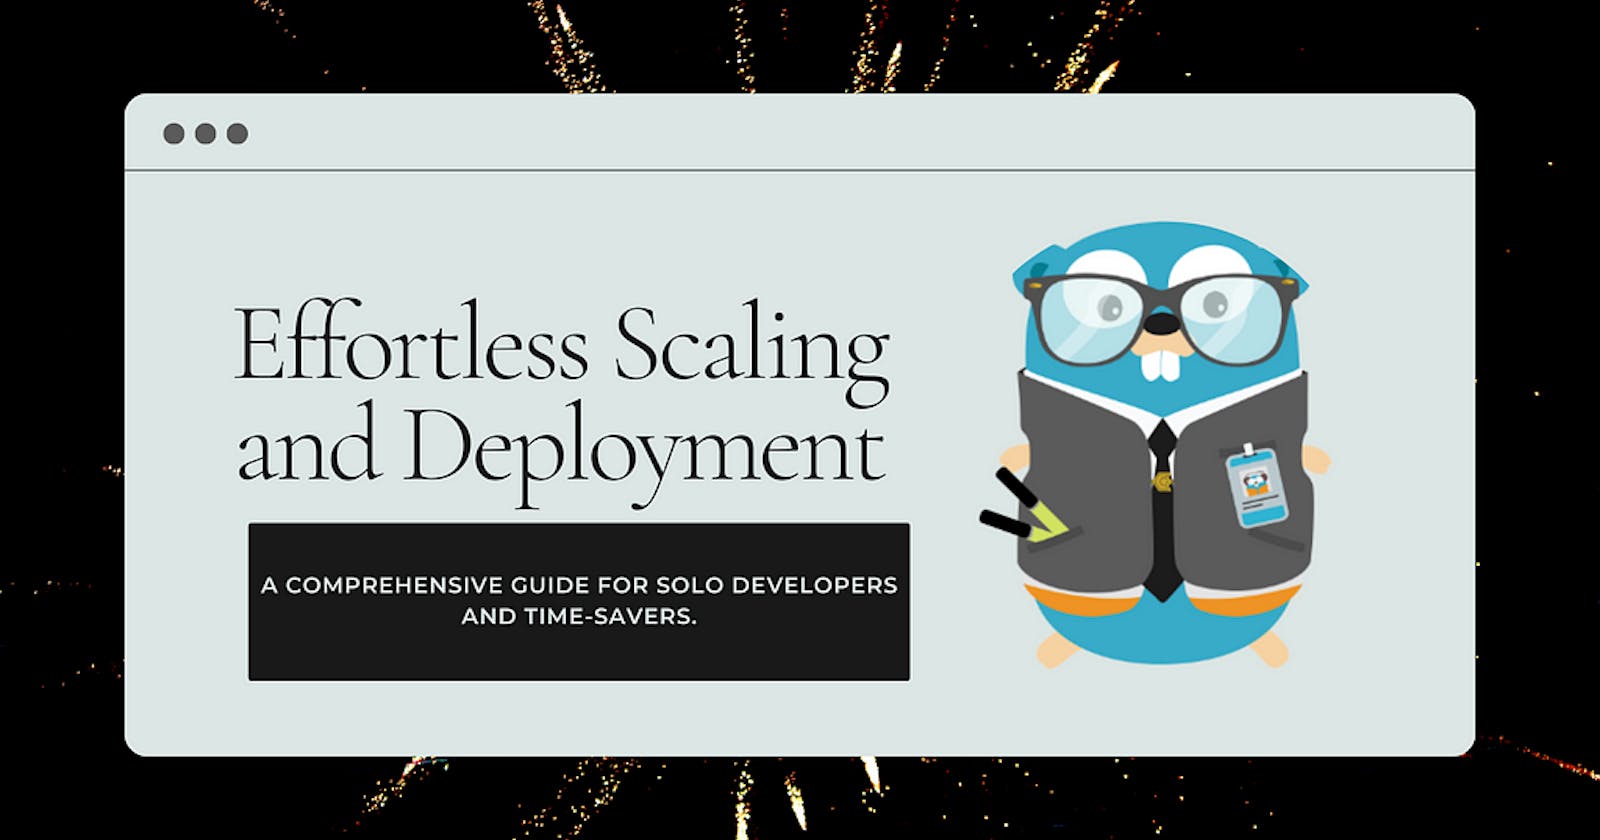 Effortless Scaling and Deployment: A Comprehensive Guide for Solo Developers and Time-Savers